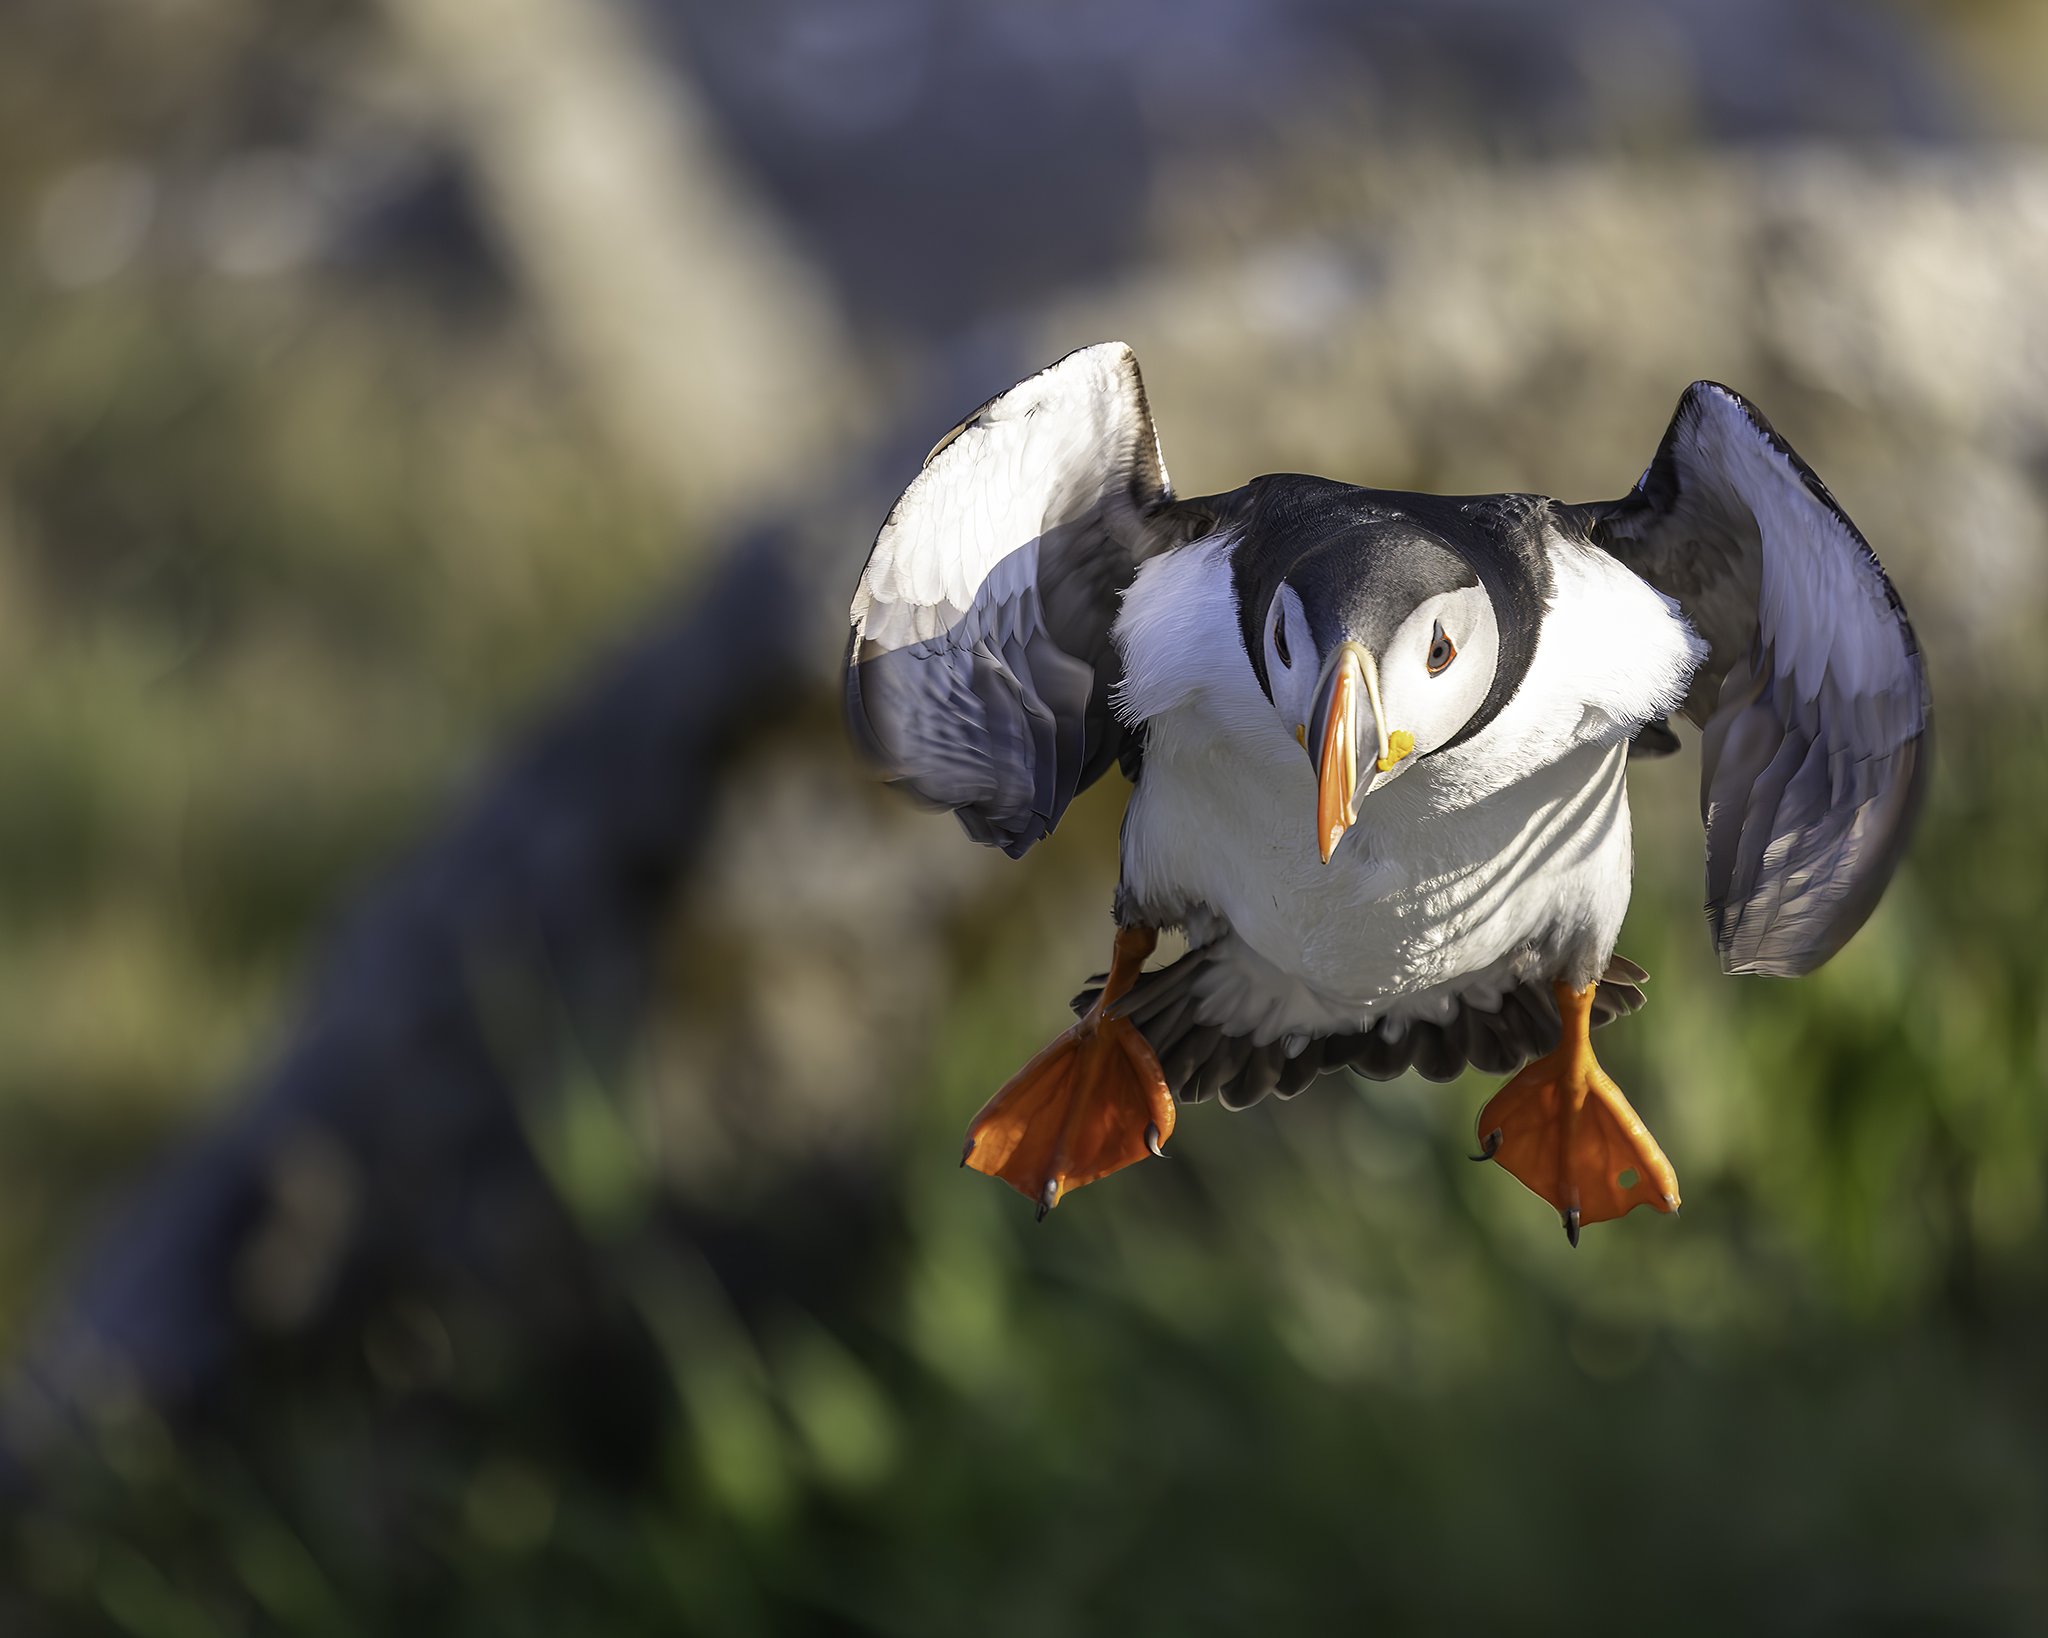 Puffin in for landing.